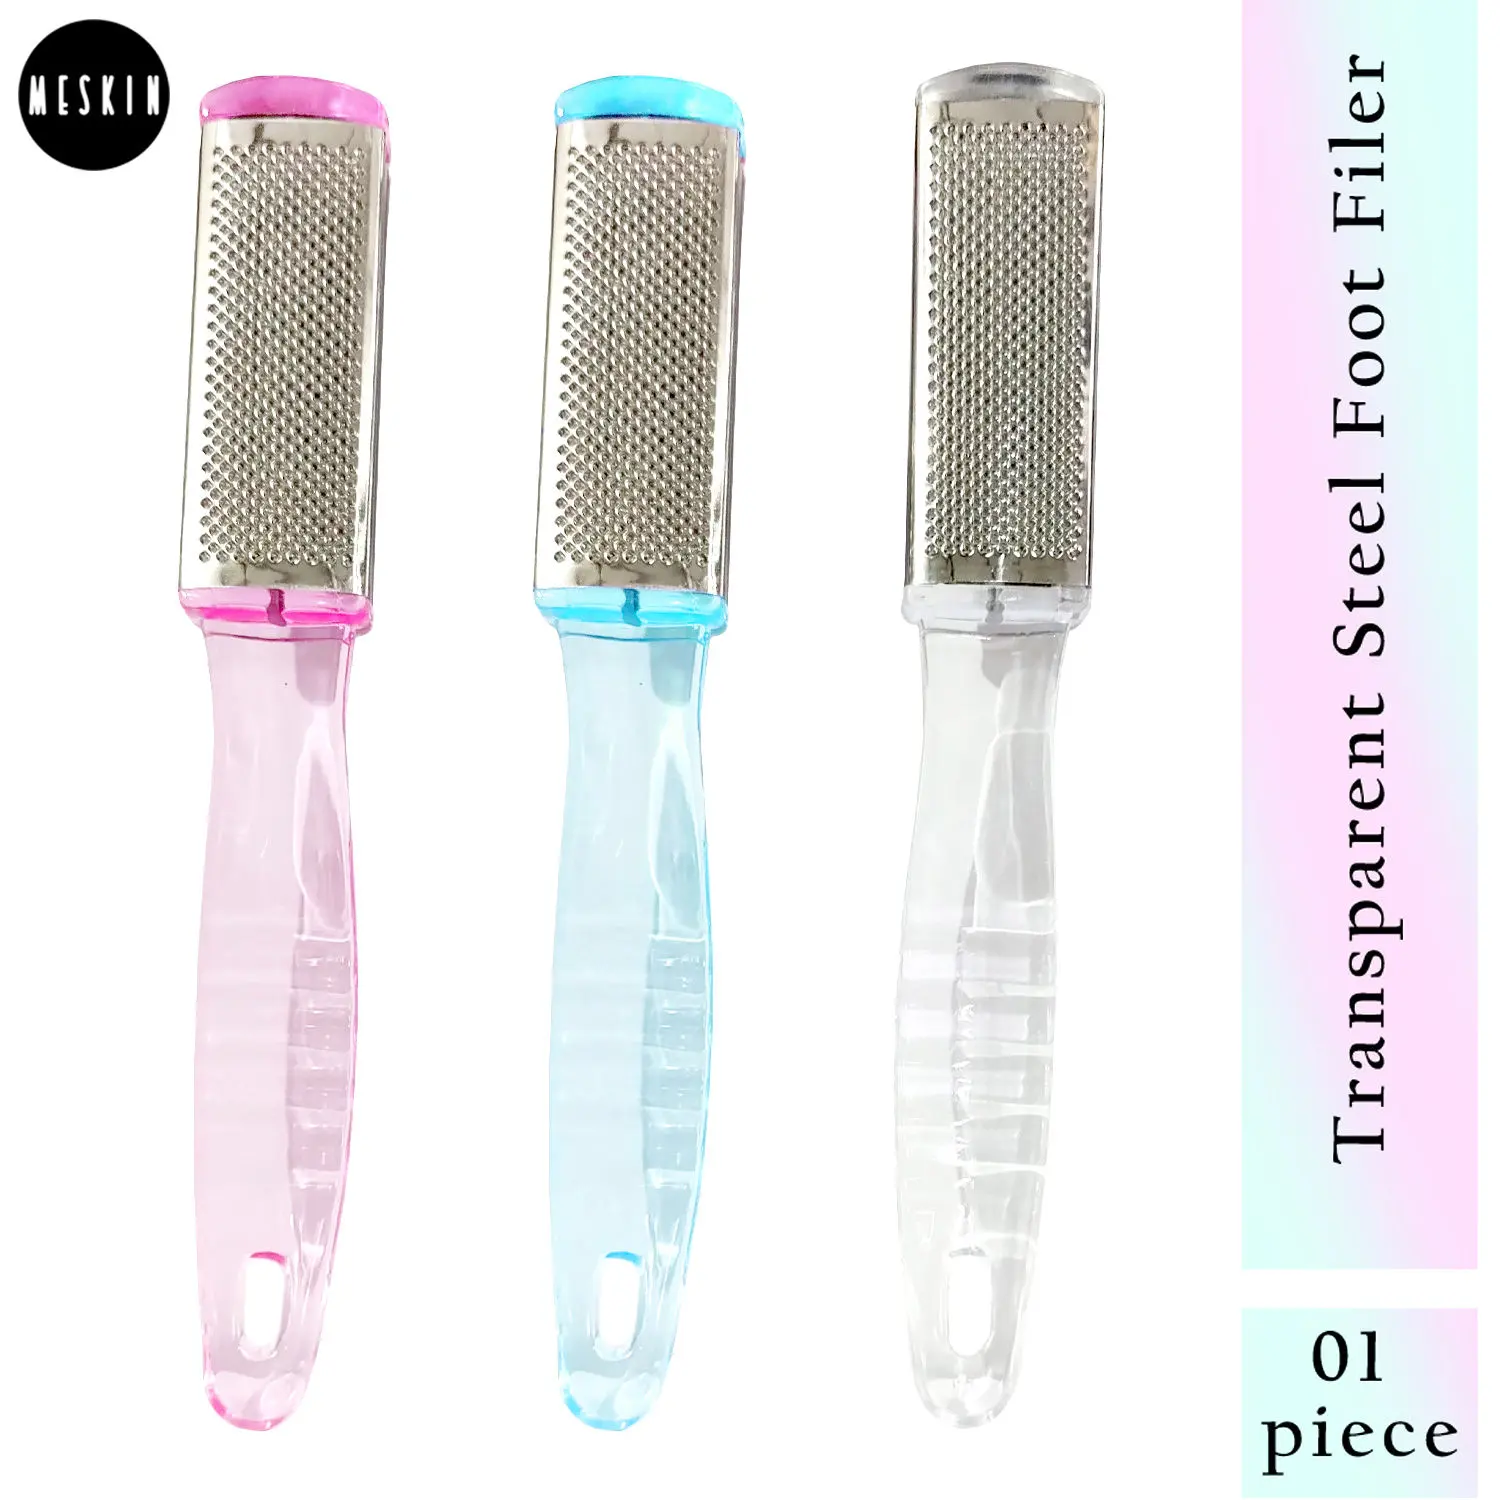 MeSkin Double Sided Transparent Steel Foot Filer Pedicure & Dead Skin Remover with Curvy Handle